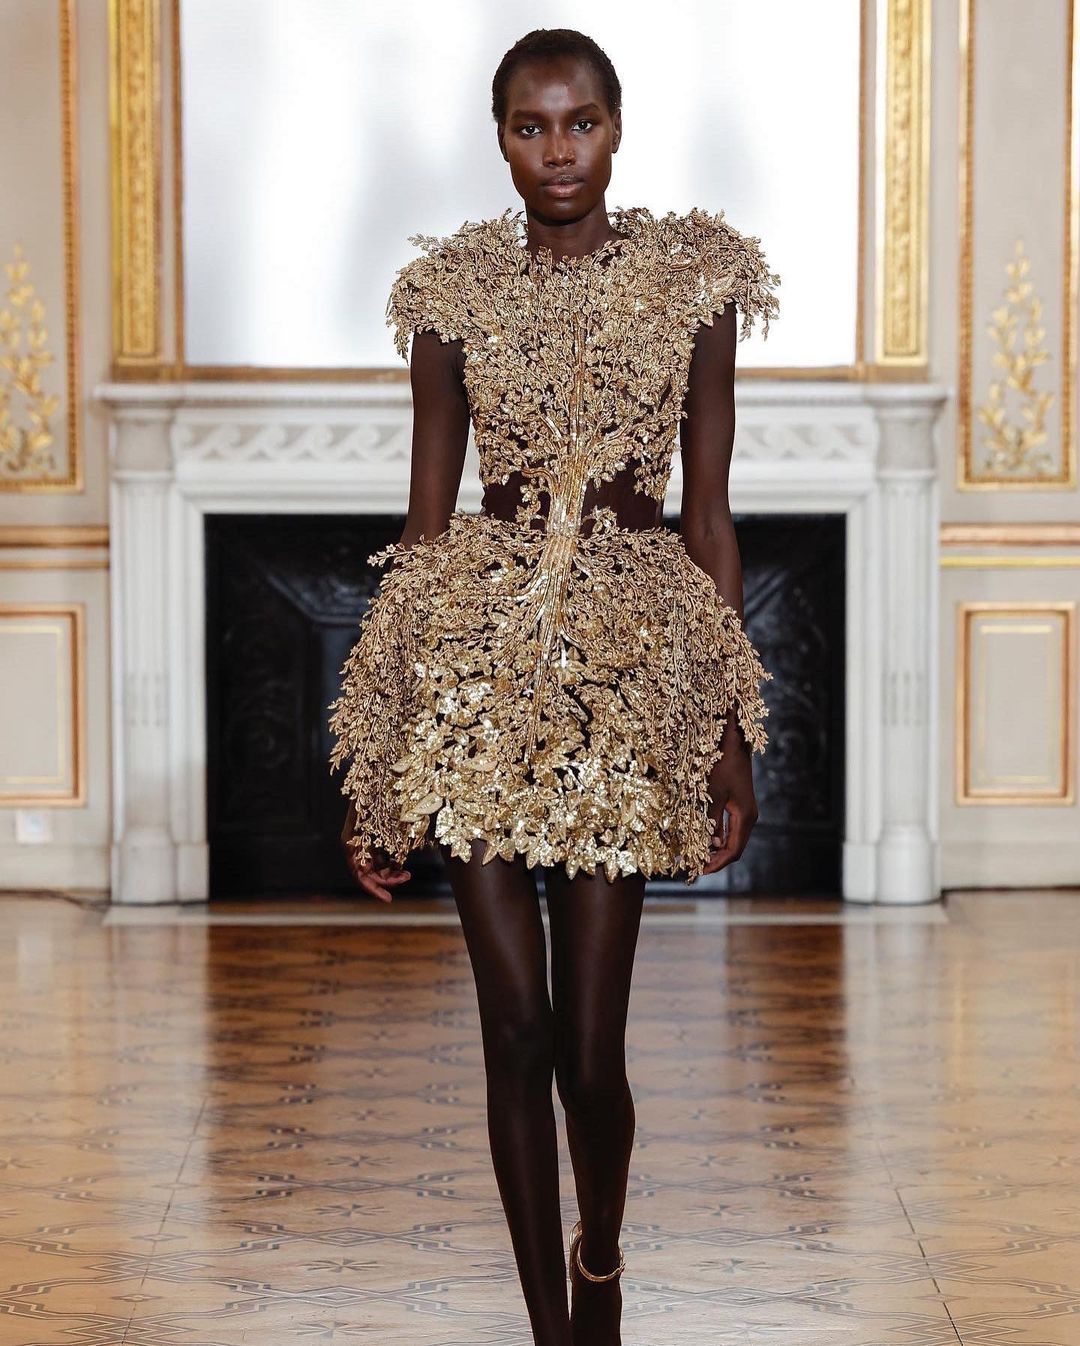 5 Runway Trends From The Autumn/Winter 2022 Haute Couture Shows